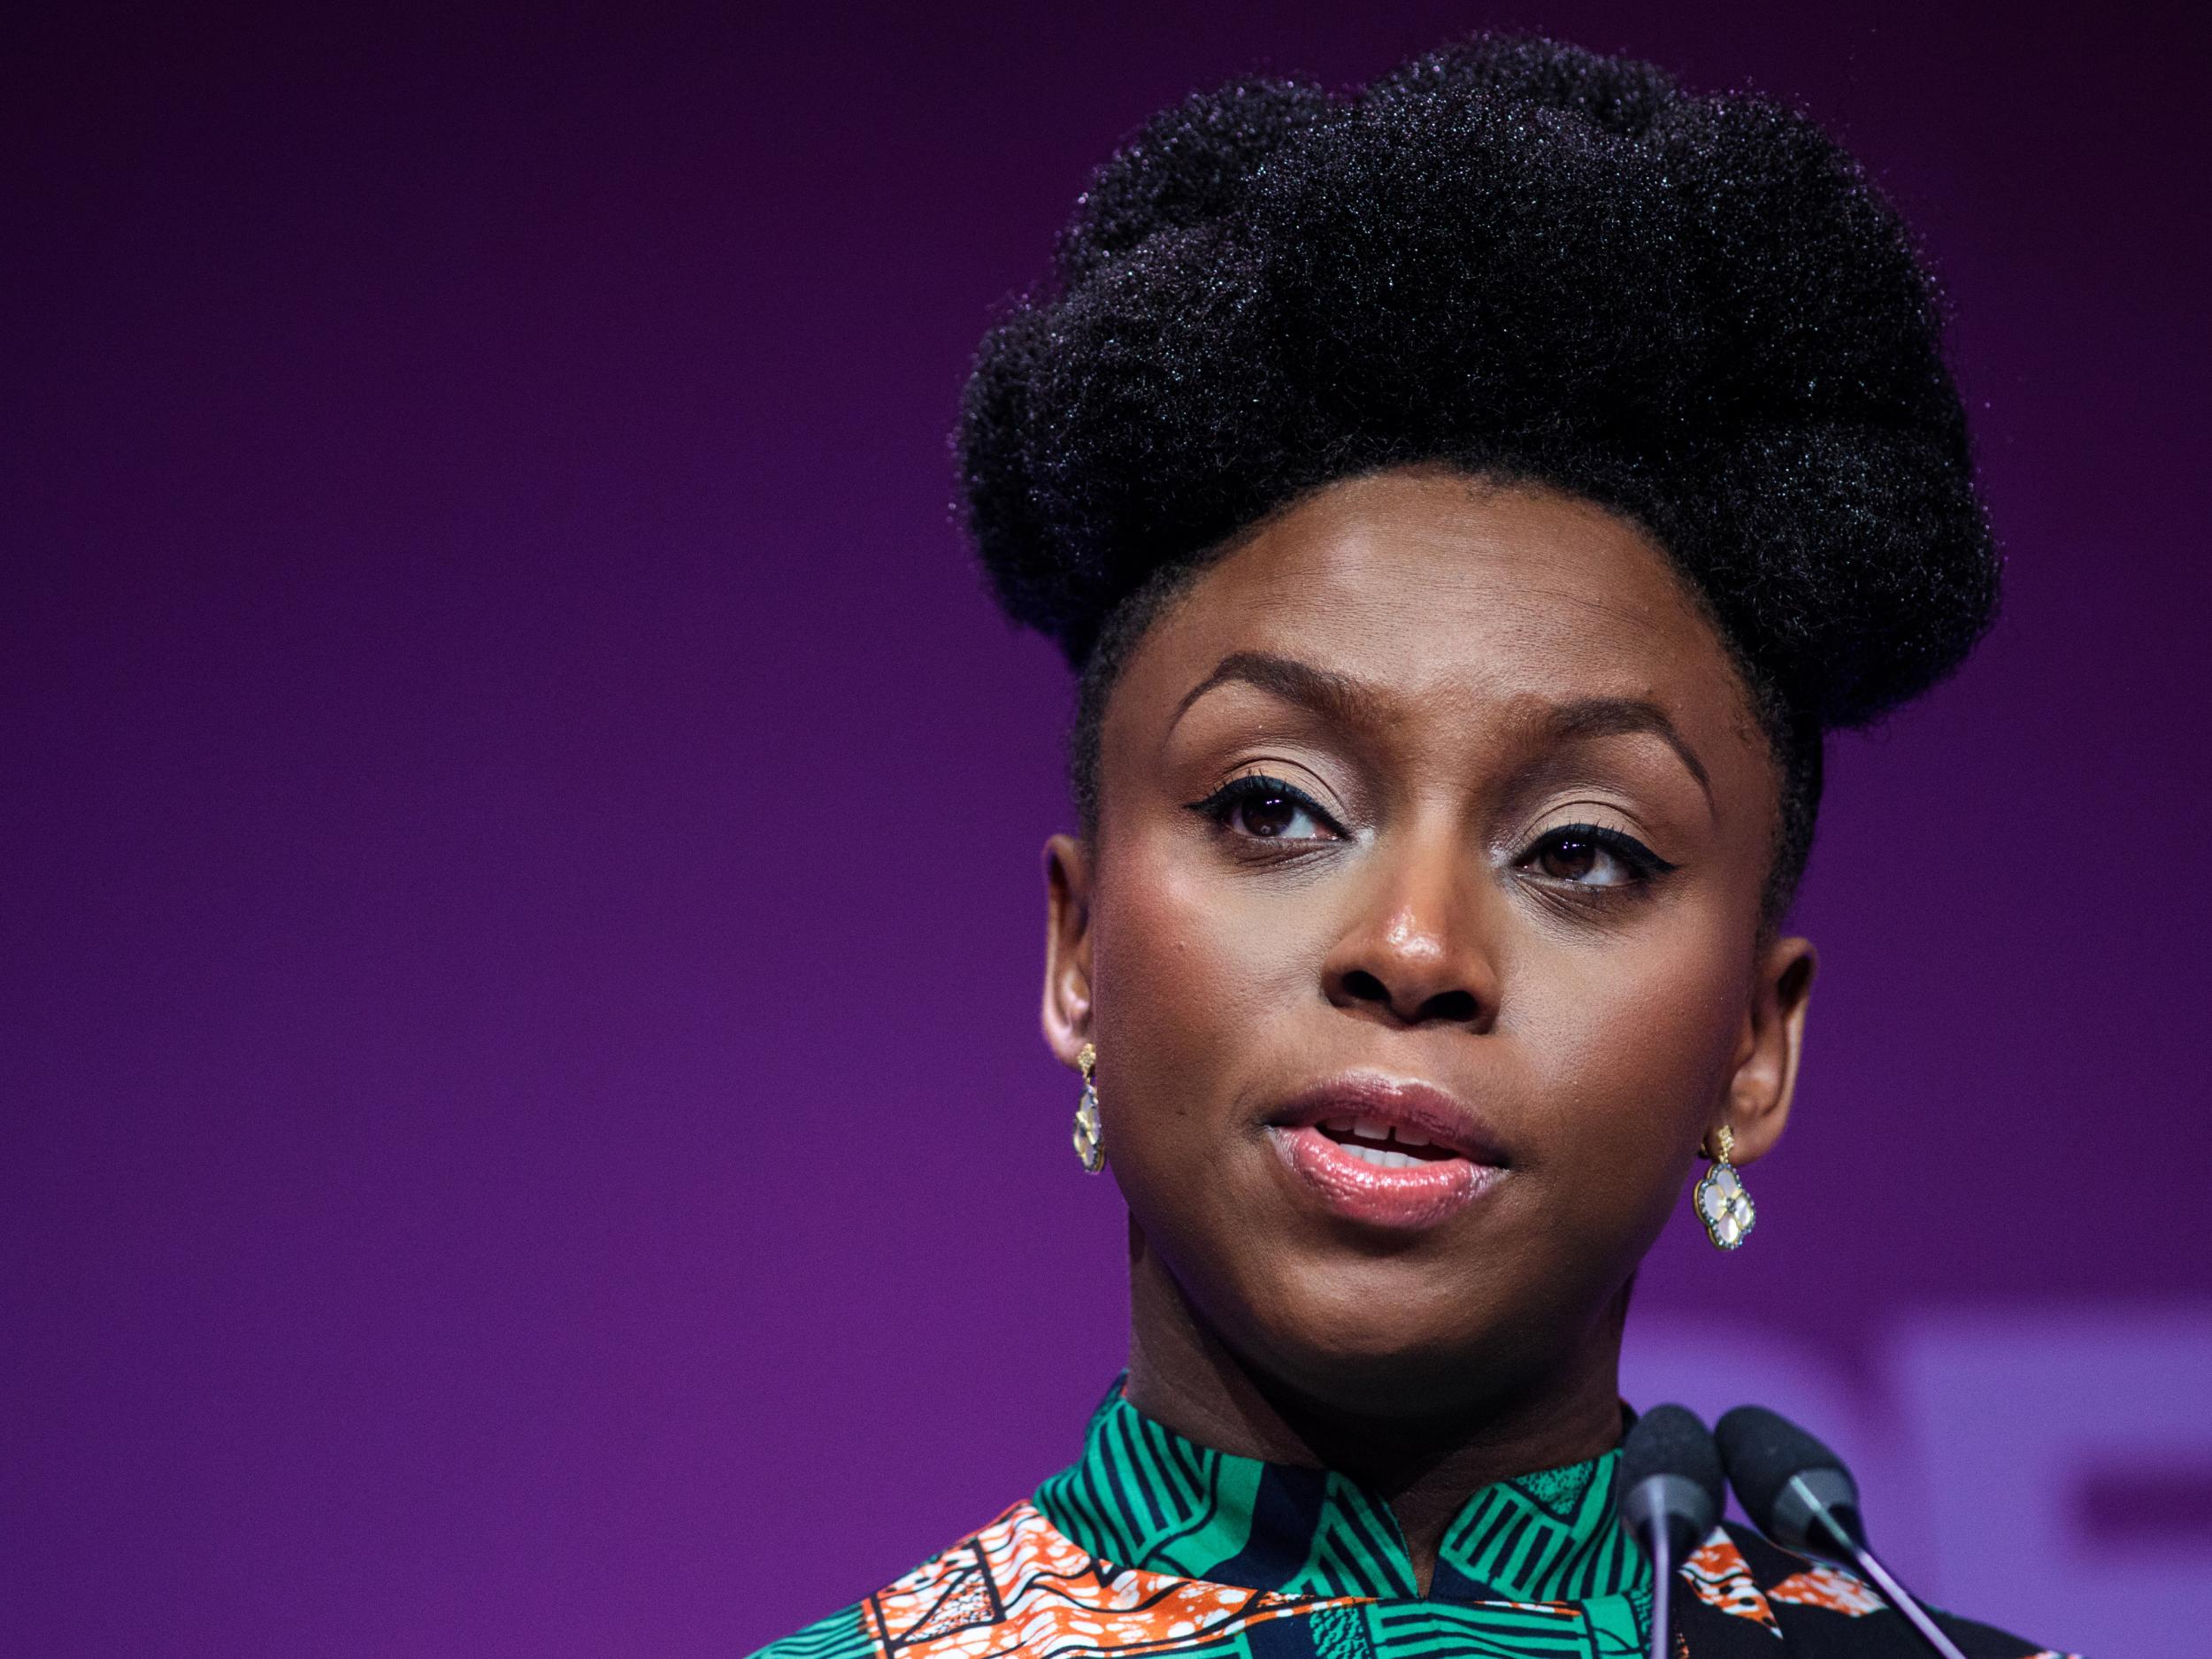 Chimamanda Ngozi Adichie made comments criticising Trump just hours before one of the president’s aides was sentenced to serve time in a federal prison